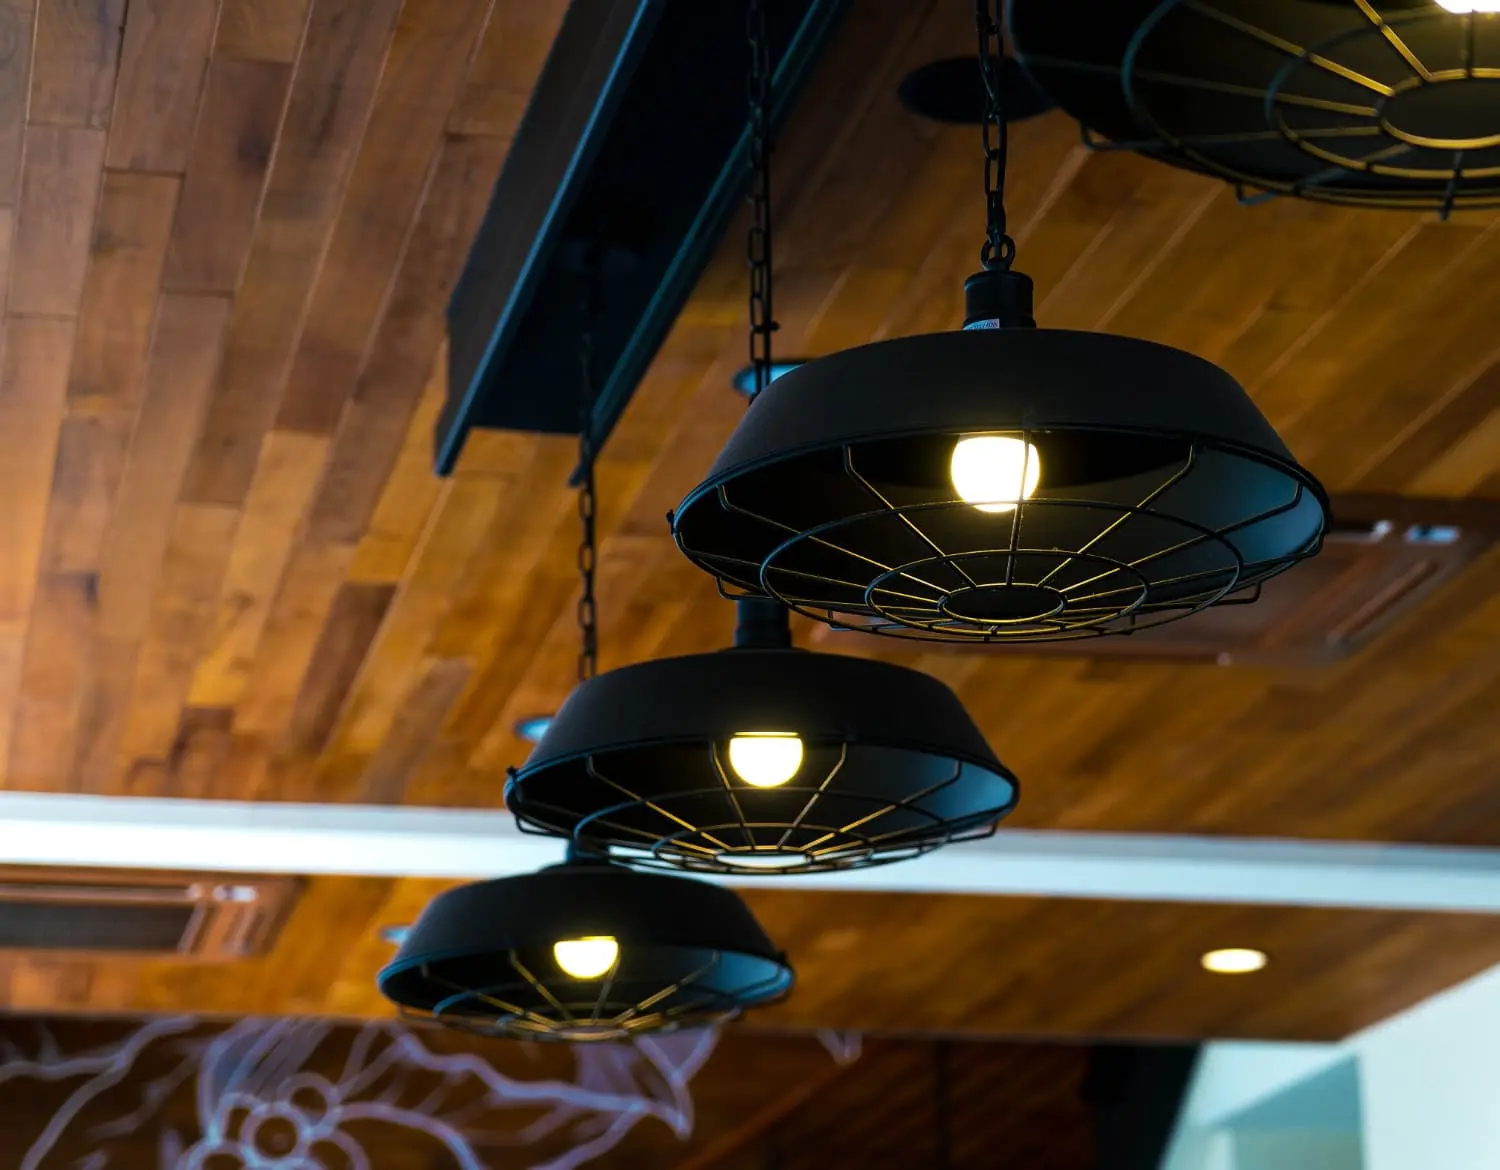 Three modern pendant light fixtures hanging from the ceiling